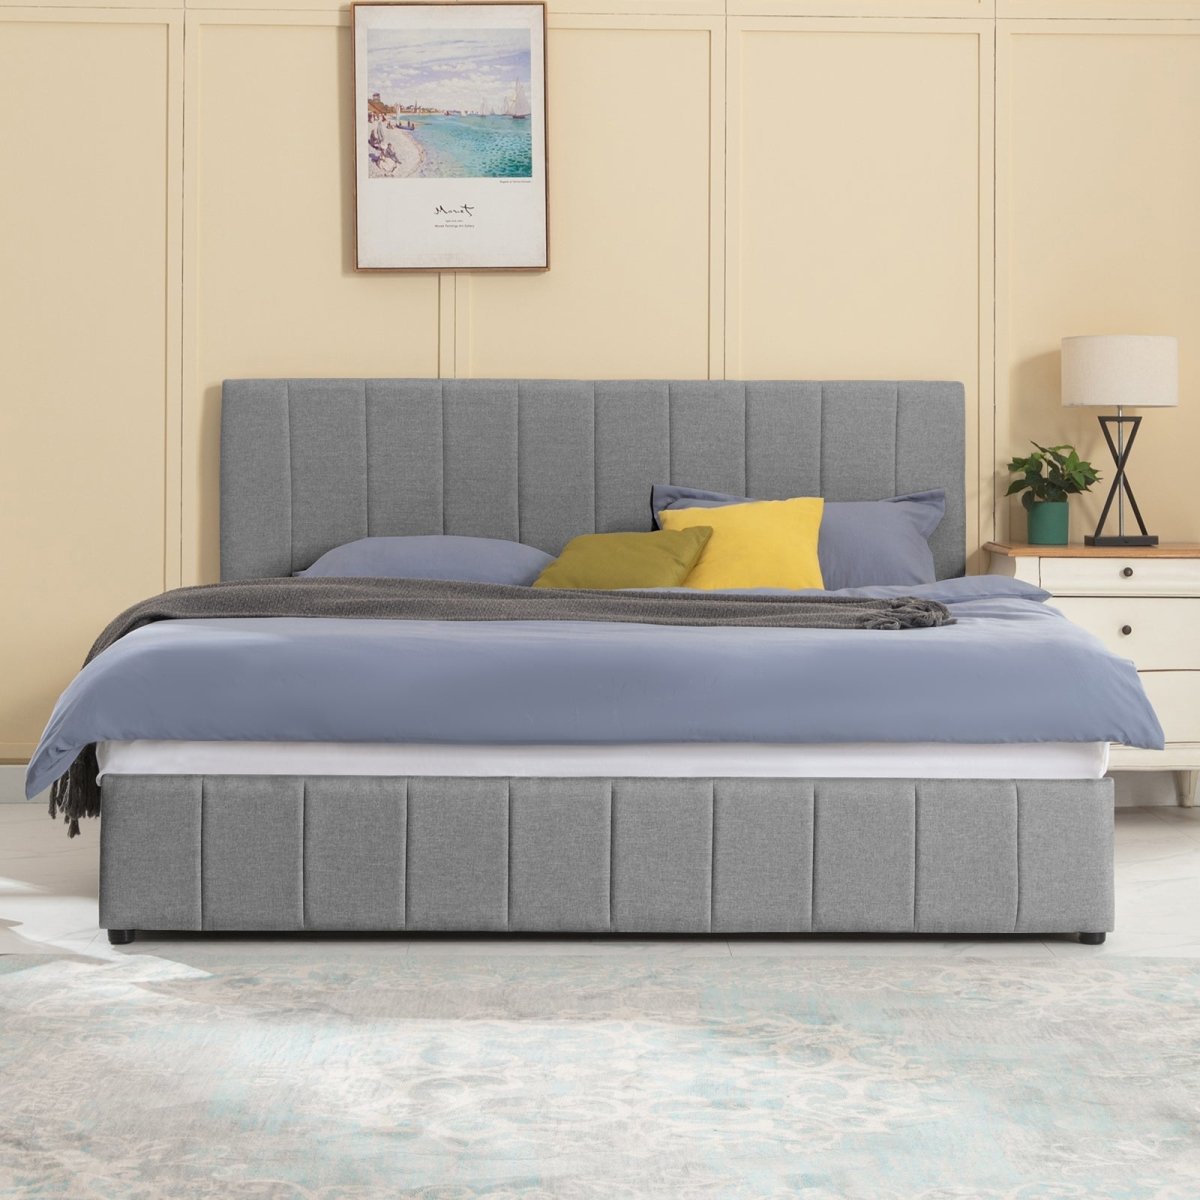 Bed Frame | Linen Upholstered Bed with Vertical Tufted Headboard and Under-bed Storage Spaces - Mjkonebed frame